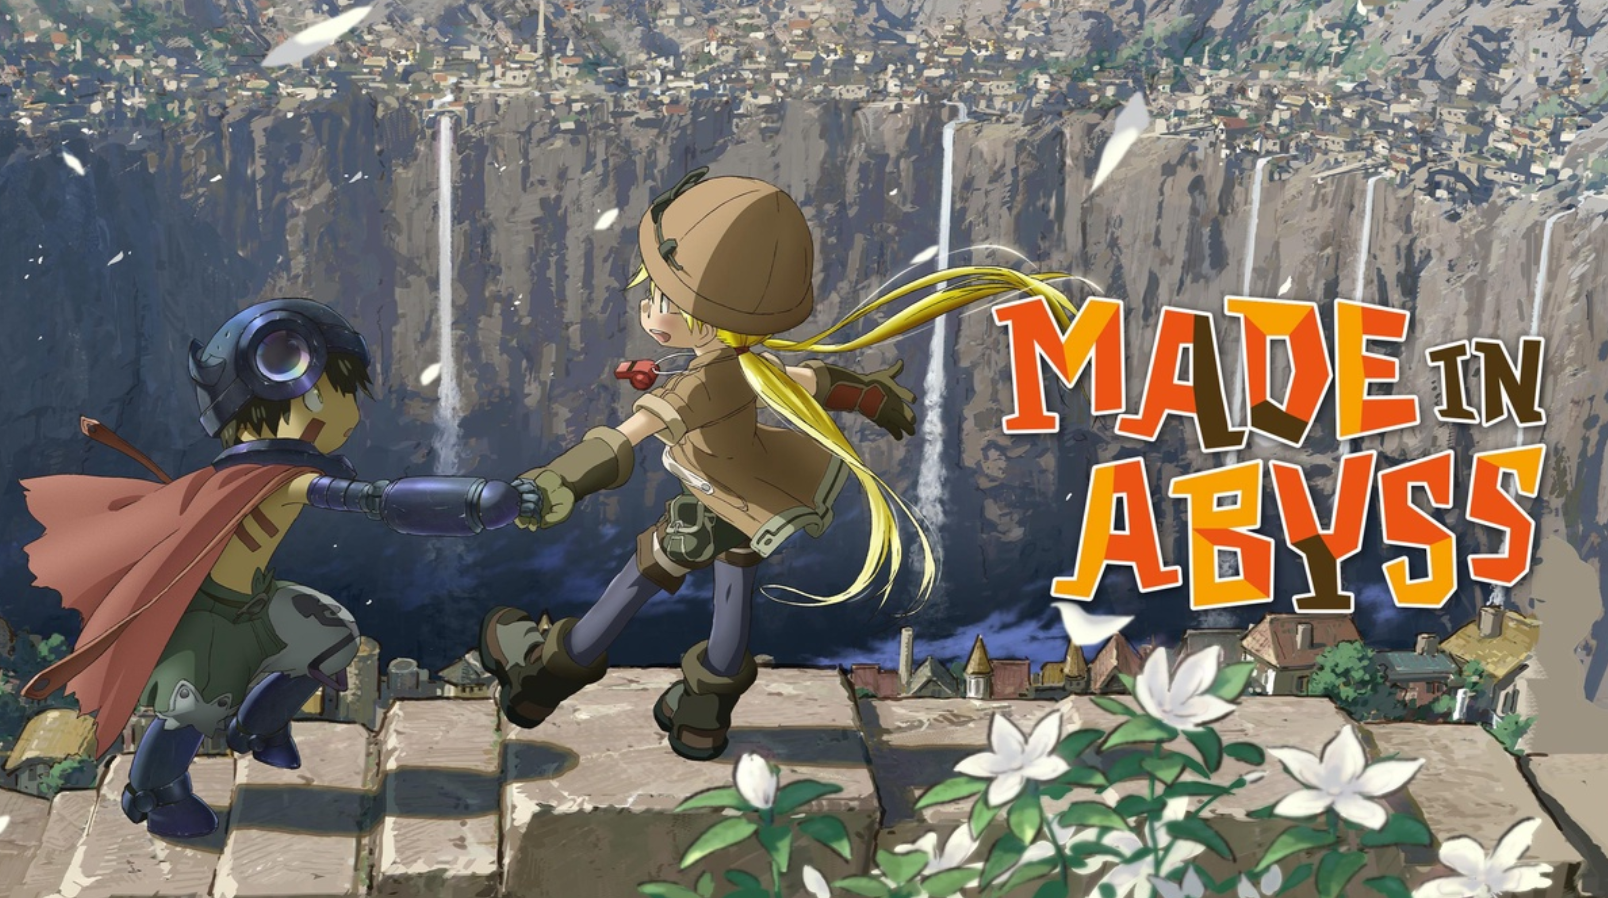 Made In Abyss Season 2: Netflix Release Date? - Inspired Traveler